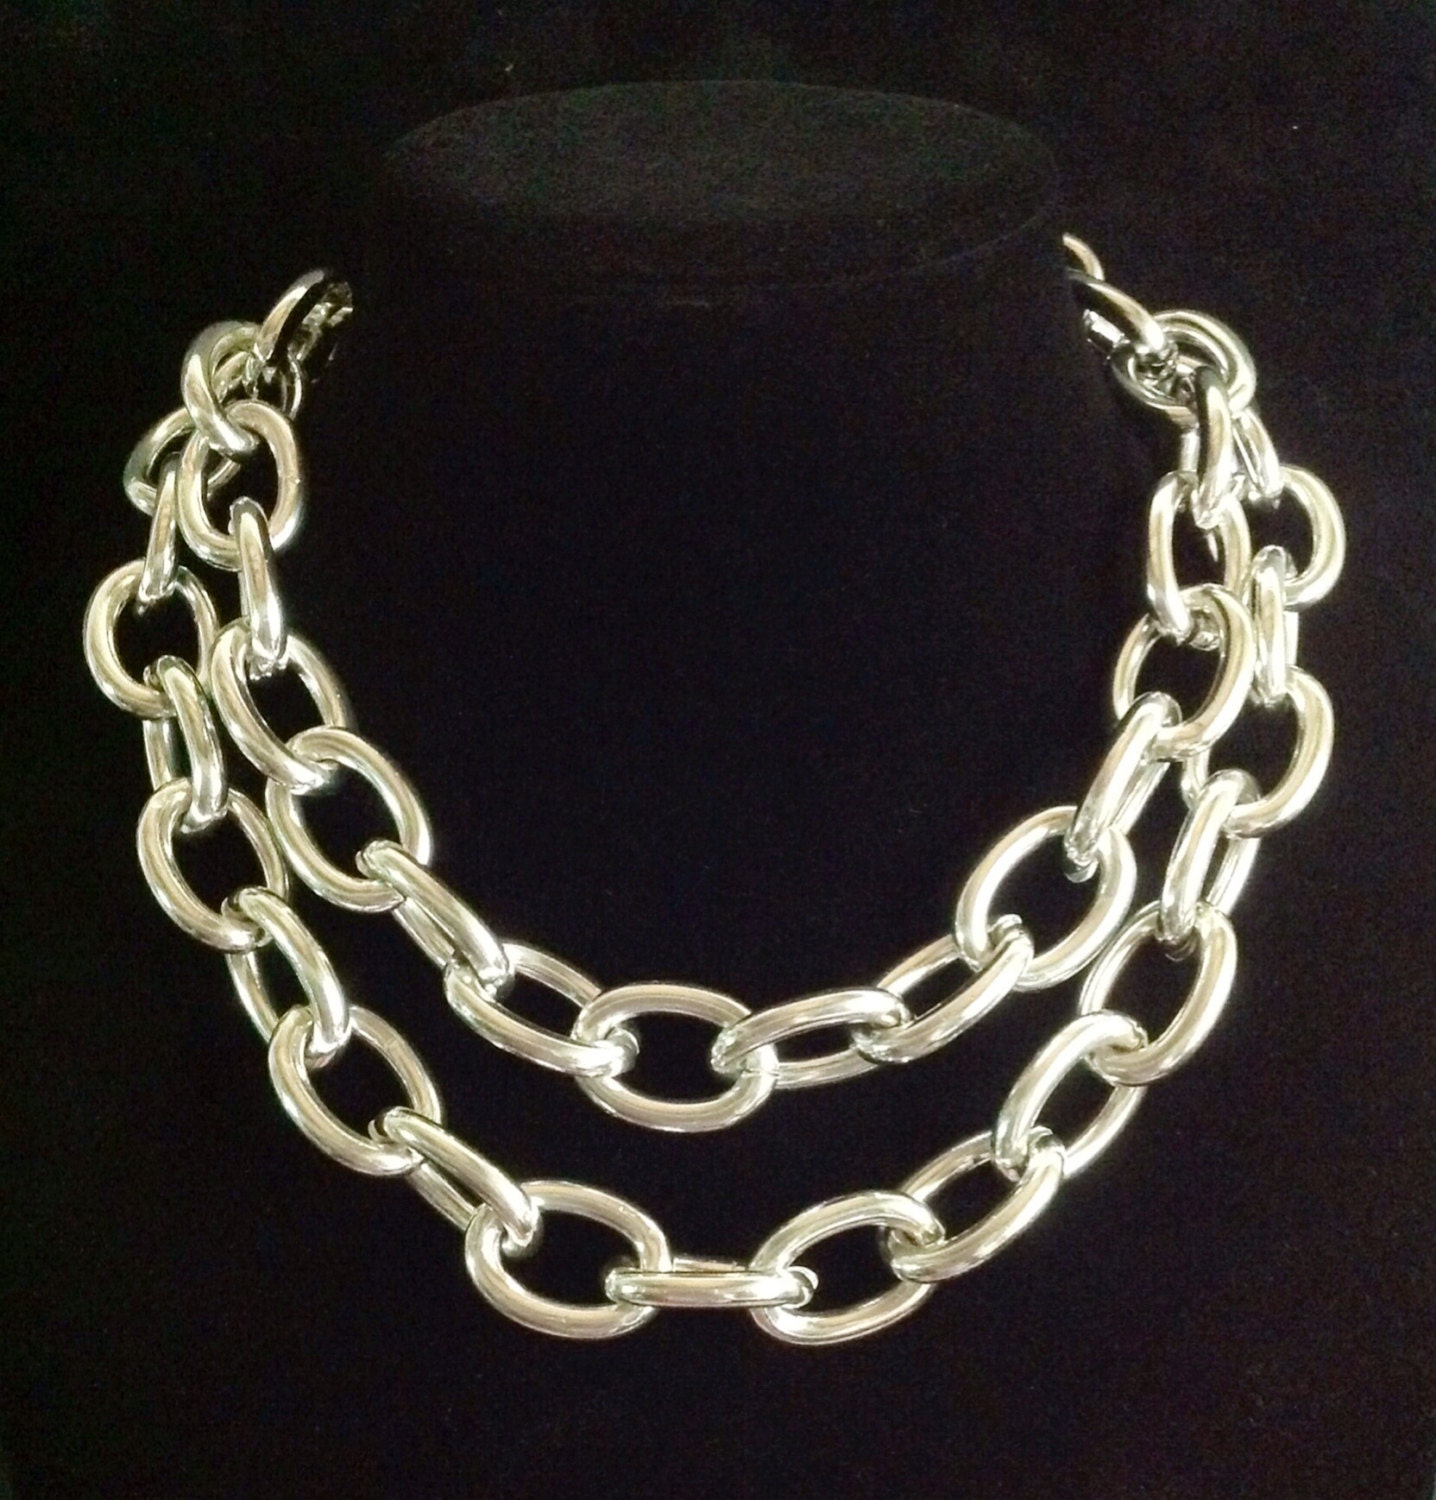 Chunky silver chain necklace. Silver chain necklace. Large